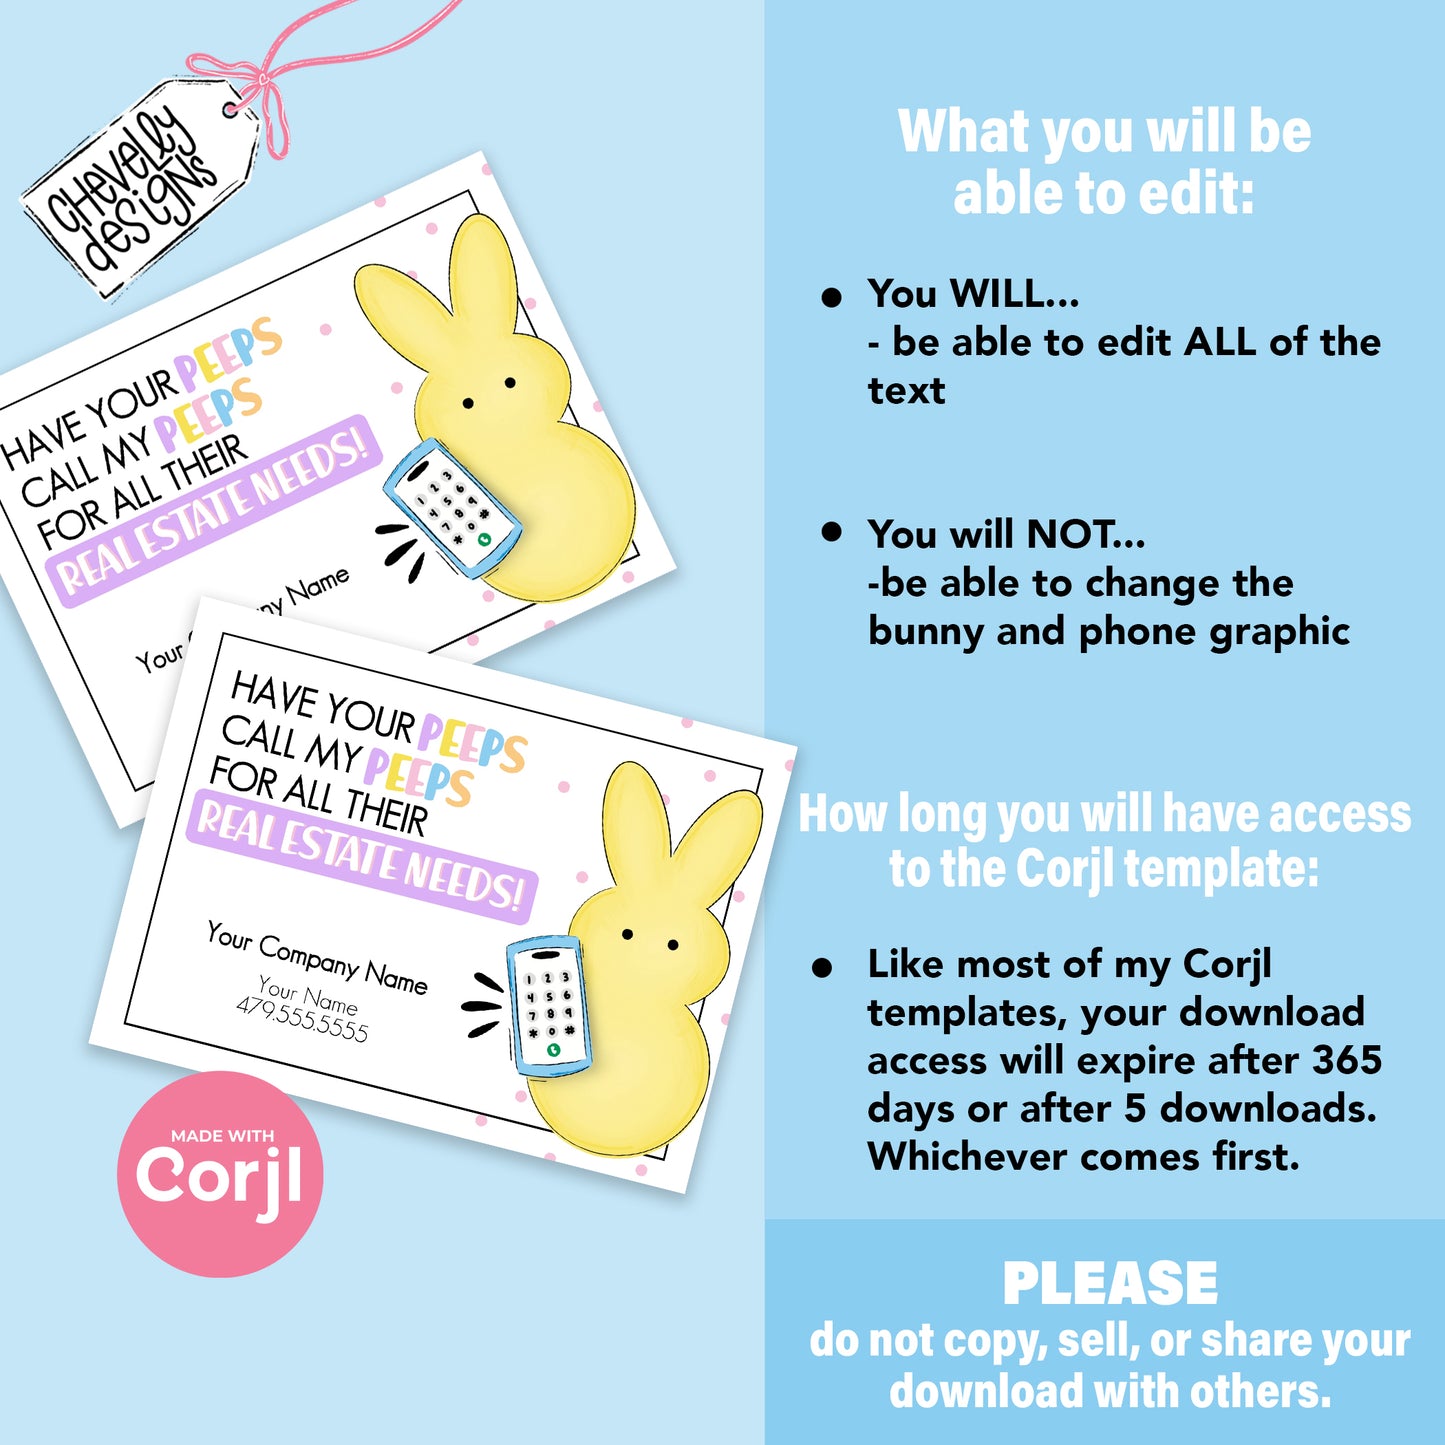 EDITABLE - Call my peeps for all your real estate needs - Easter Business Referral Marketing Gift Tag - Printable Digital File